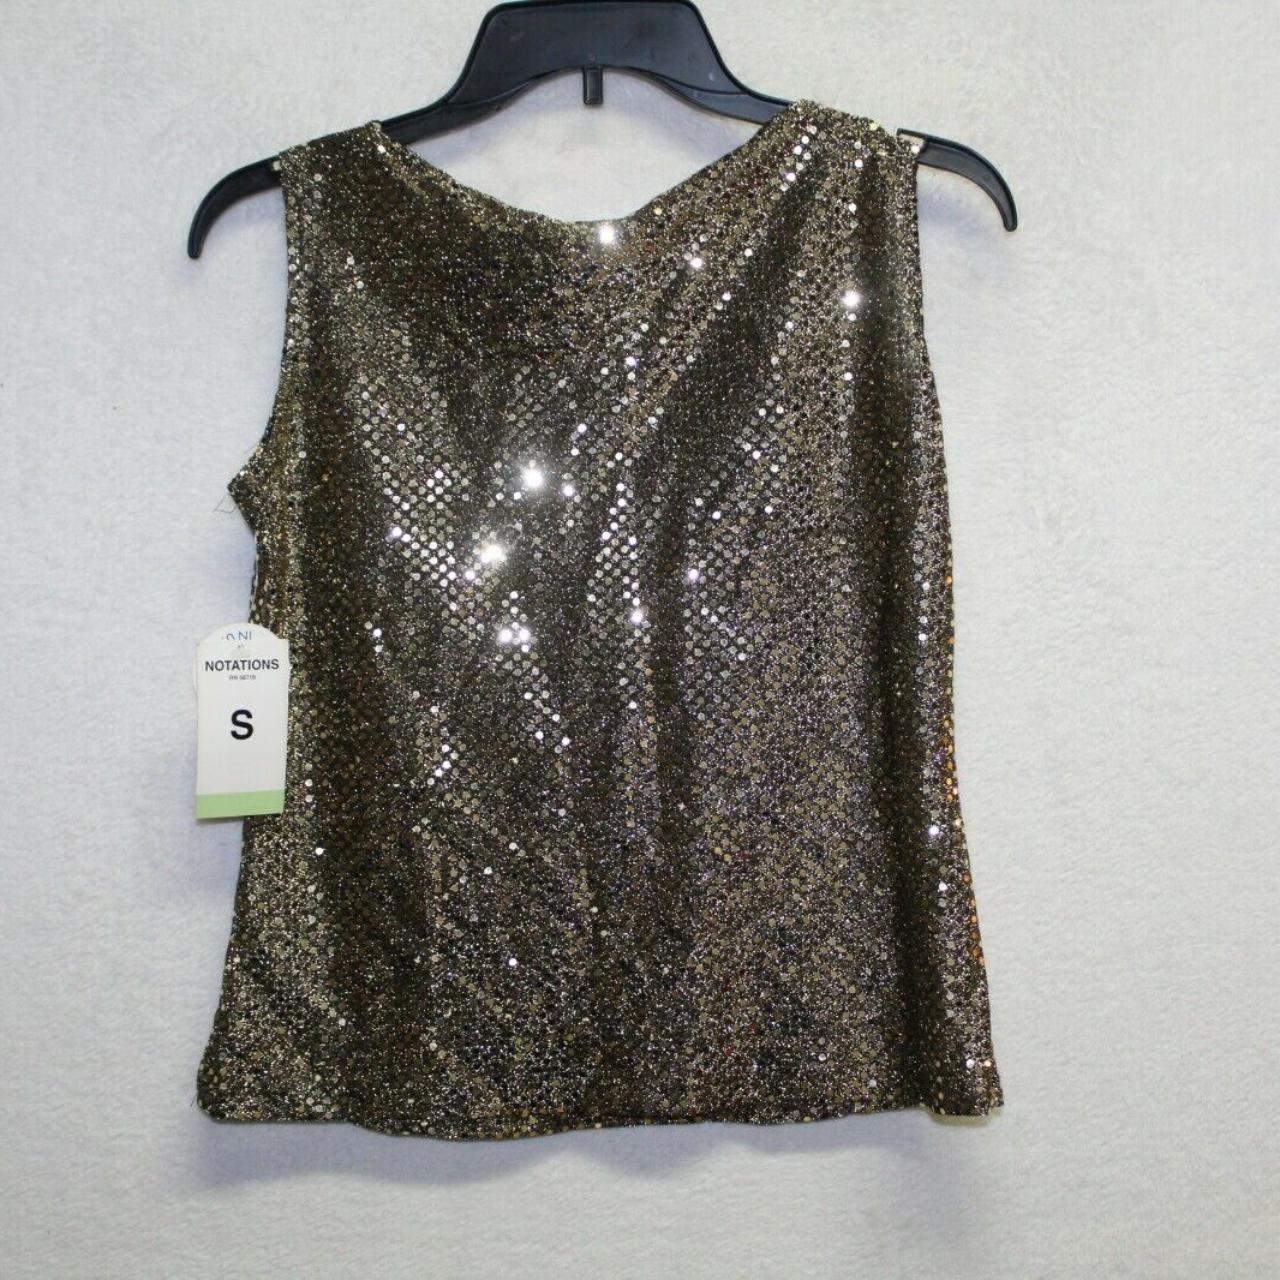 Product Image 4 - Notations womens top size S